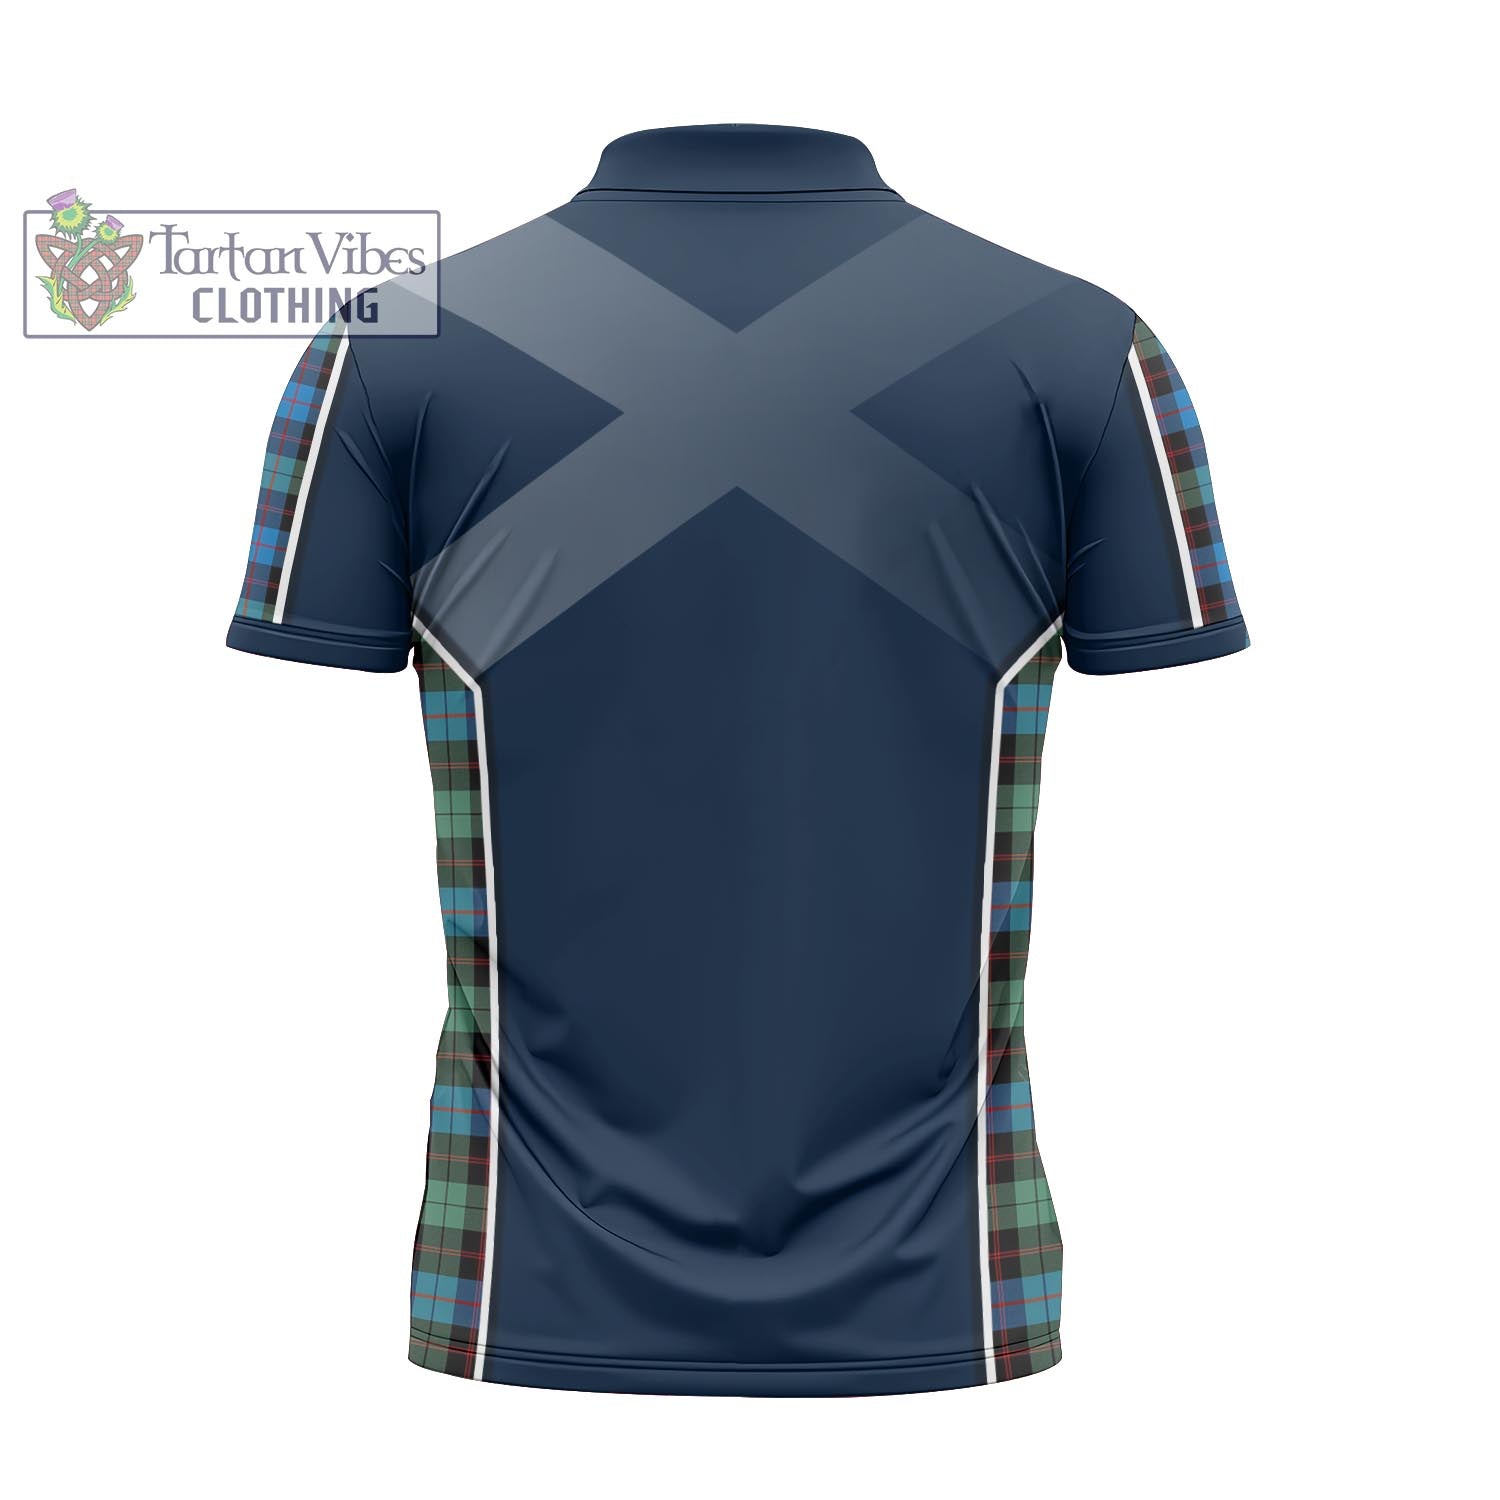 Tartan Vibes Clothing Guthrie Ancient Tartan Zipper Polo Shirt with Family Crest and Lion Rampant Vibes Sport Style